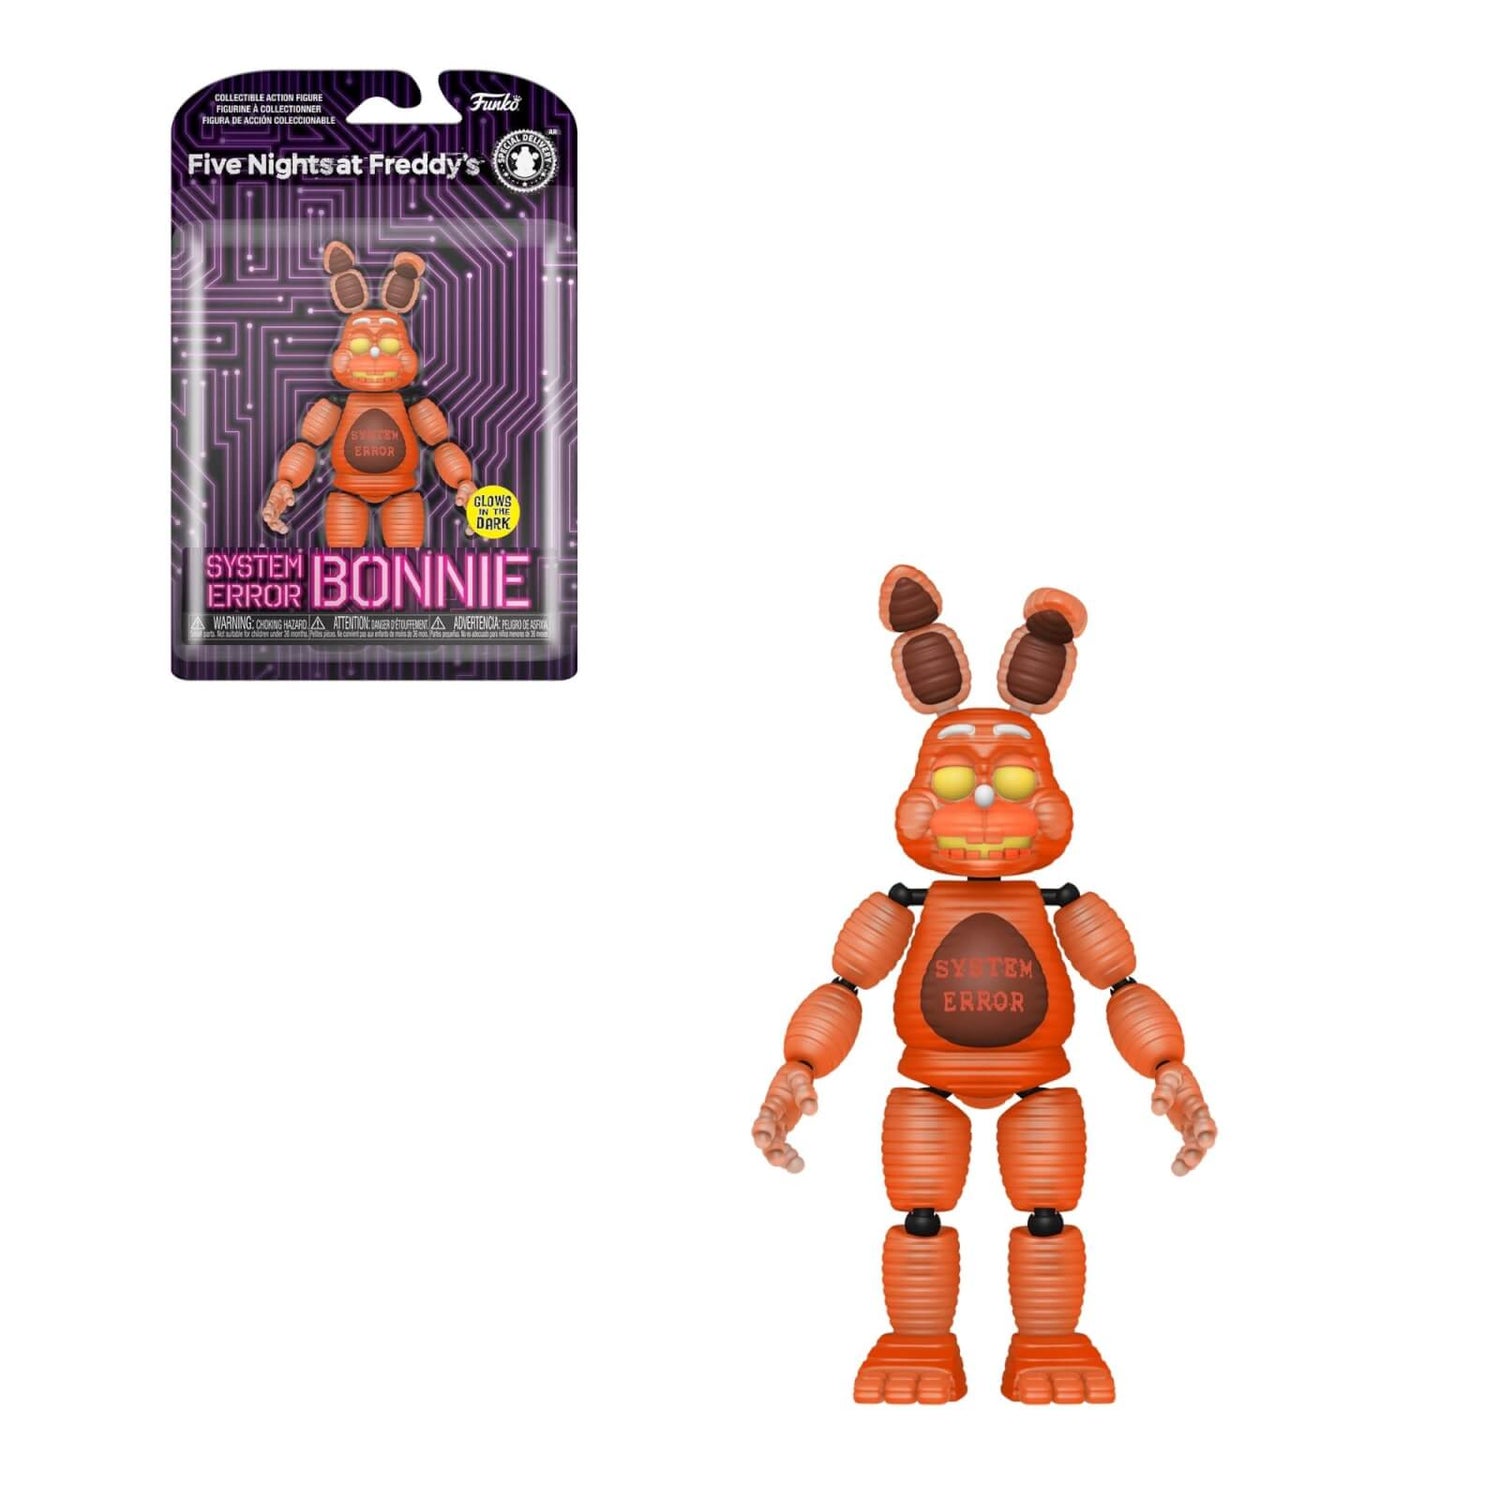 Five Nights At Freddy's System Error Bonnie Action Figure